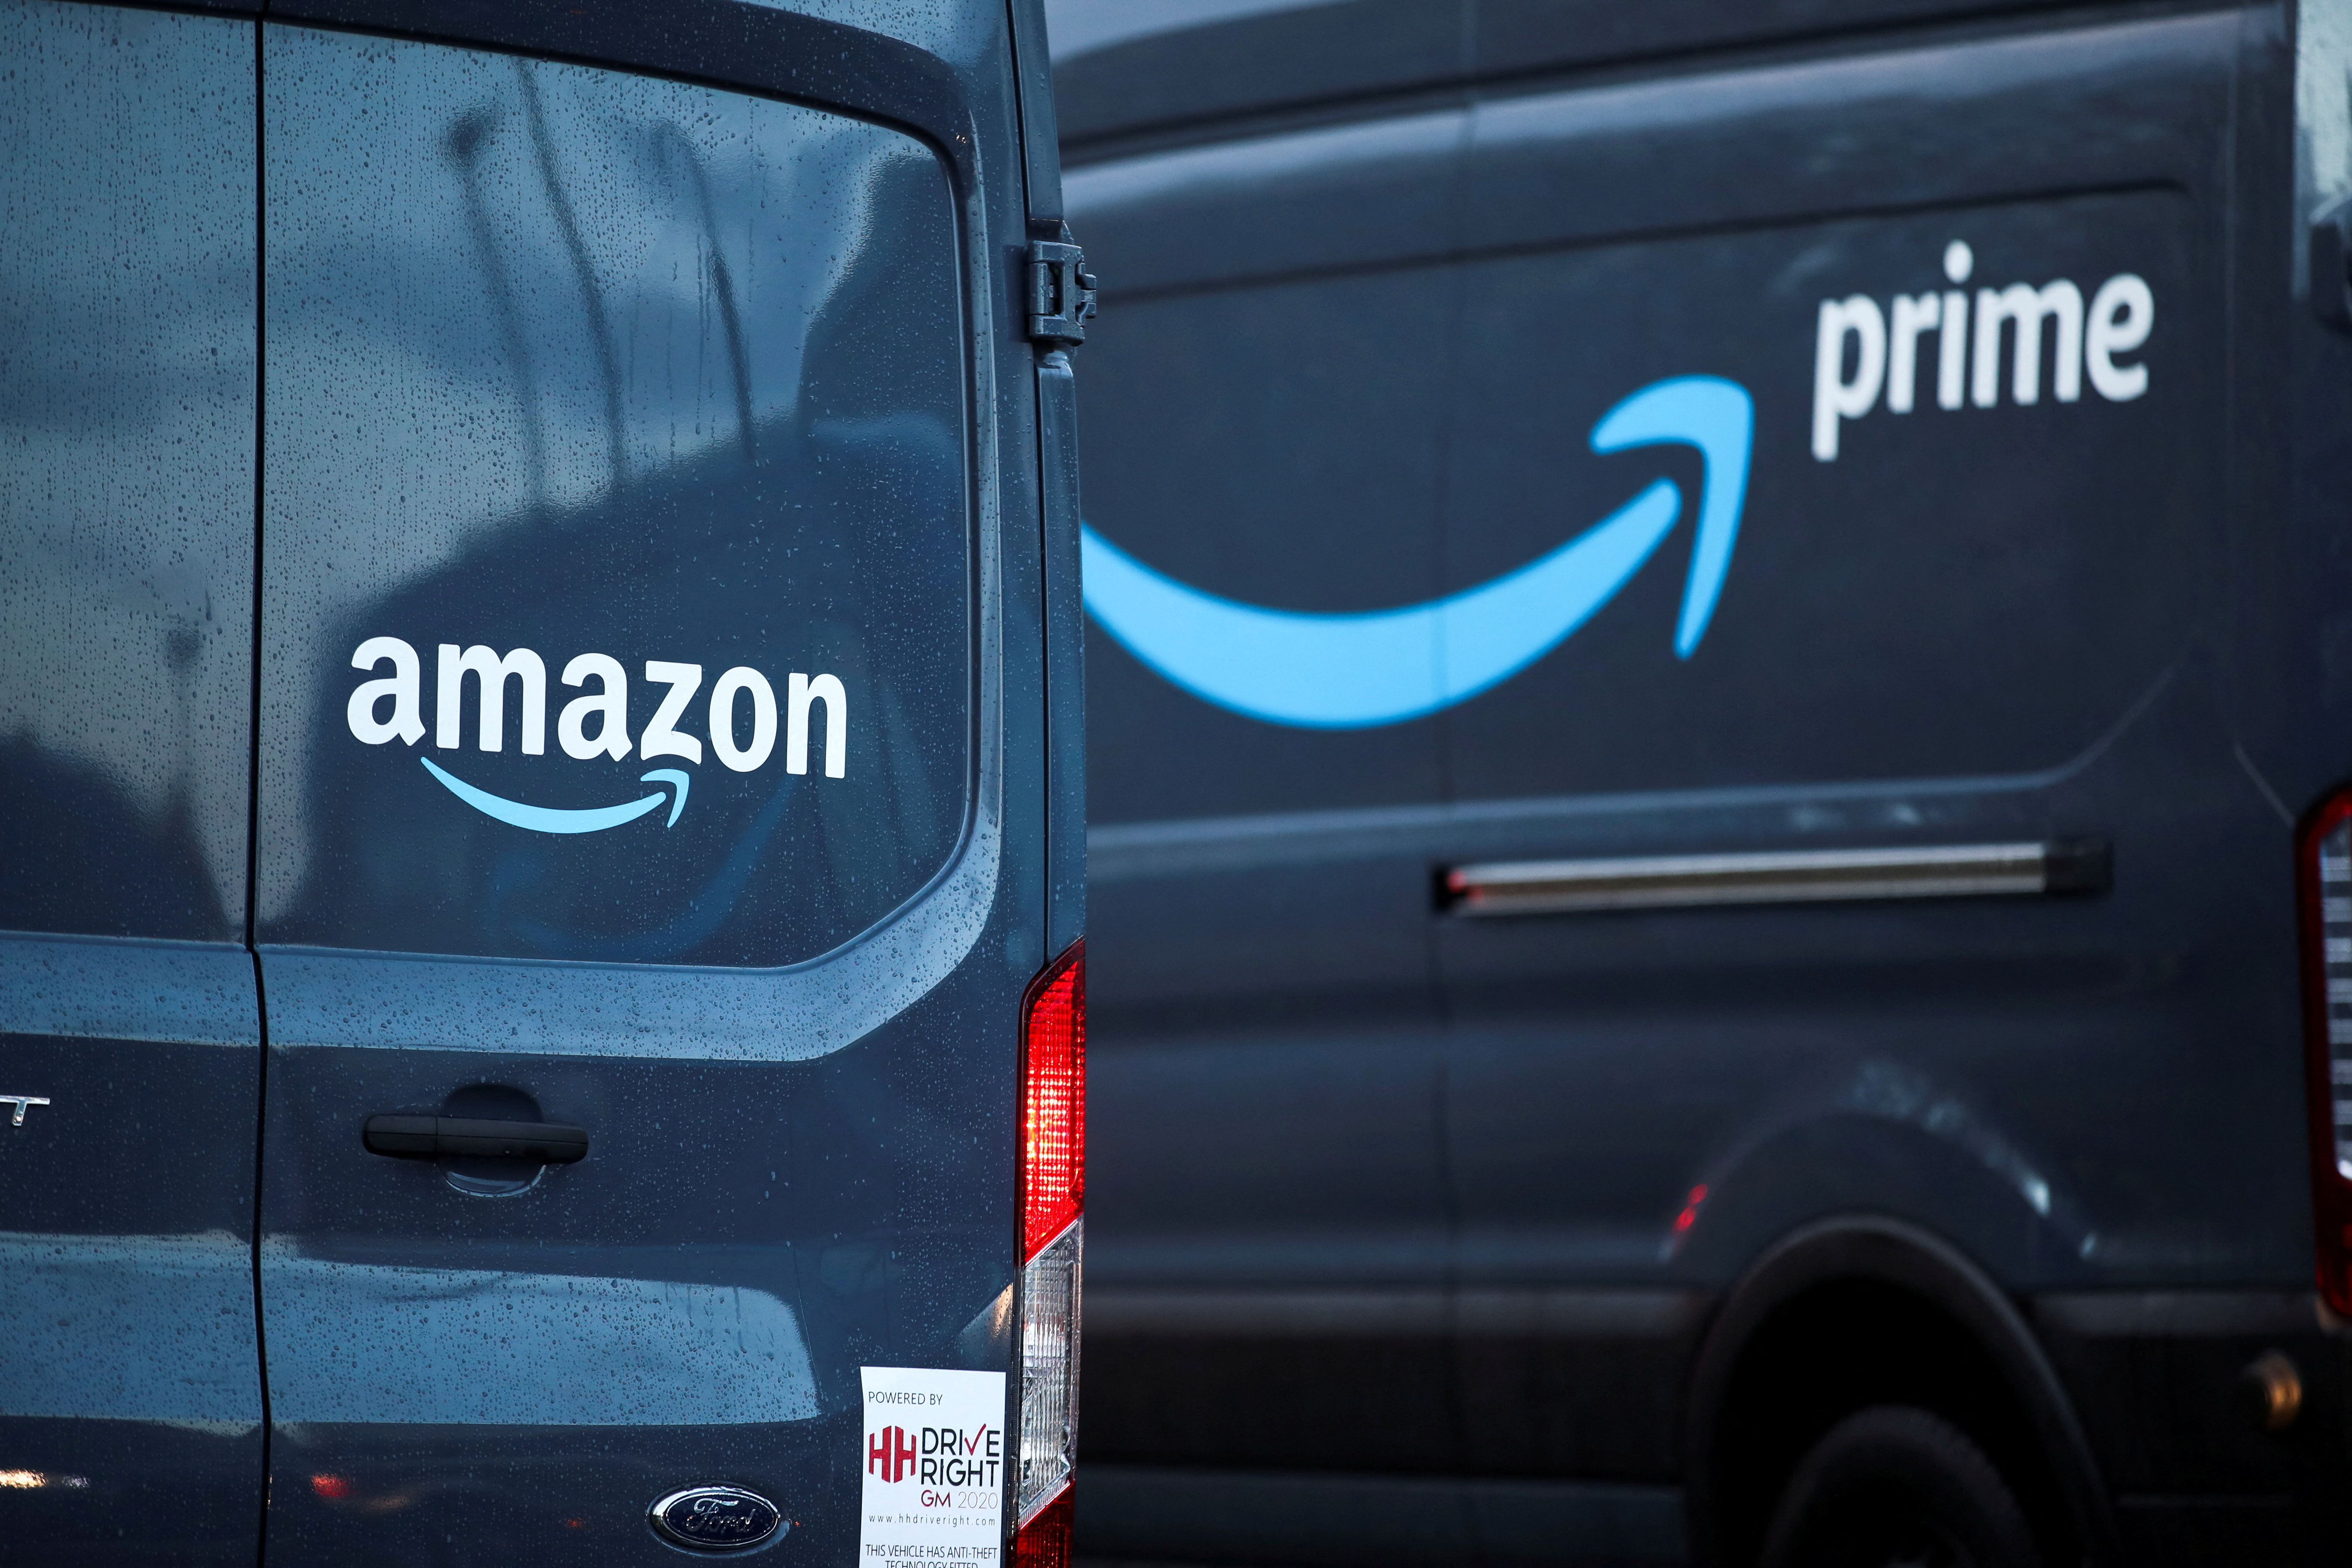 Logos of Amazon and Amazon Prime are pictured on vehicles outside the Amazon Fulfilment Centre in Altrincham